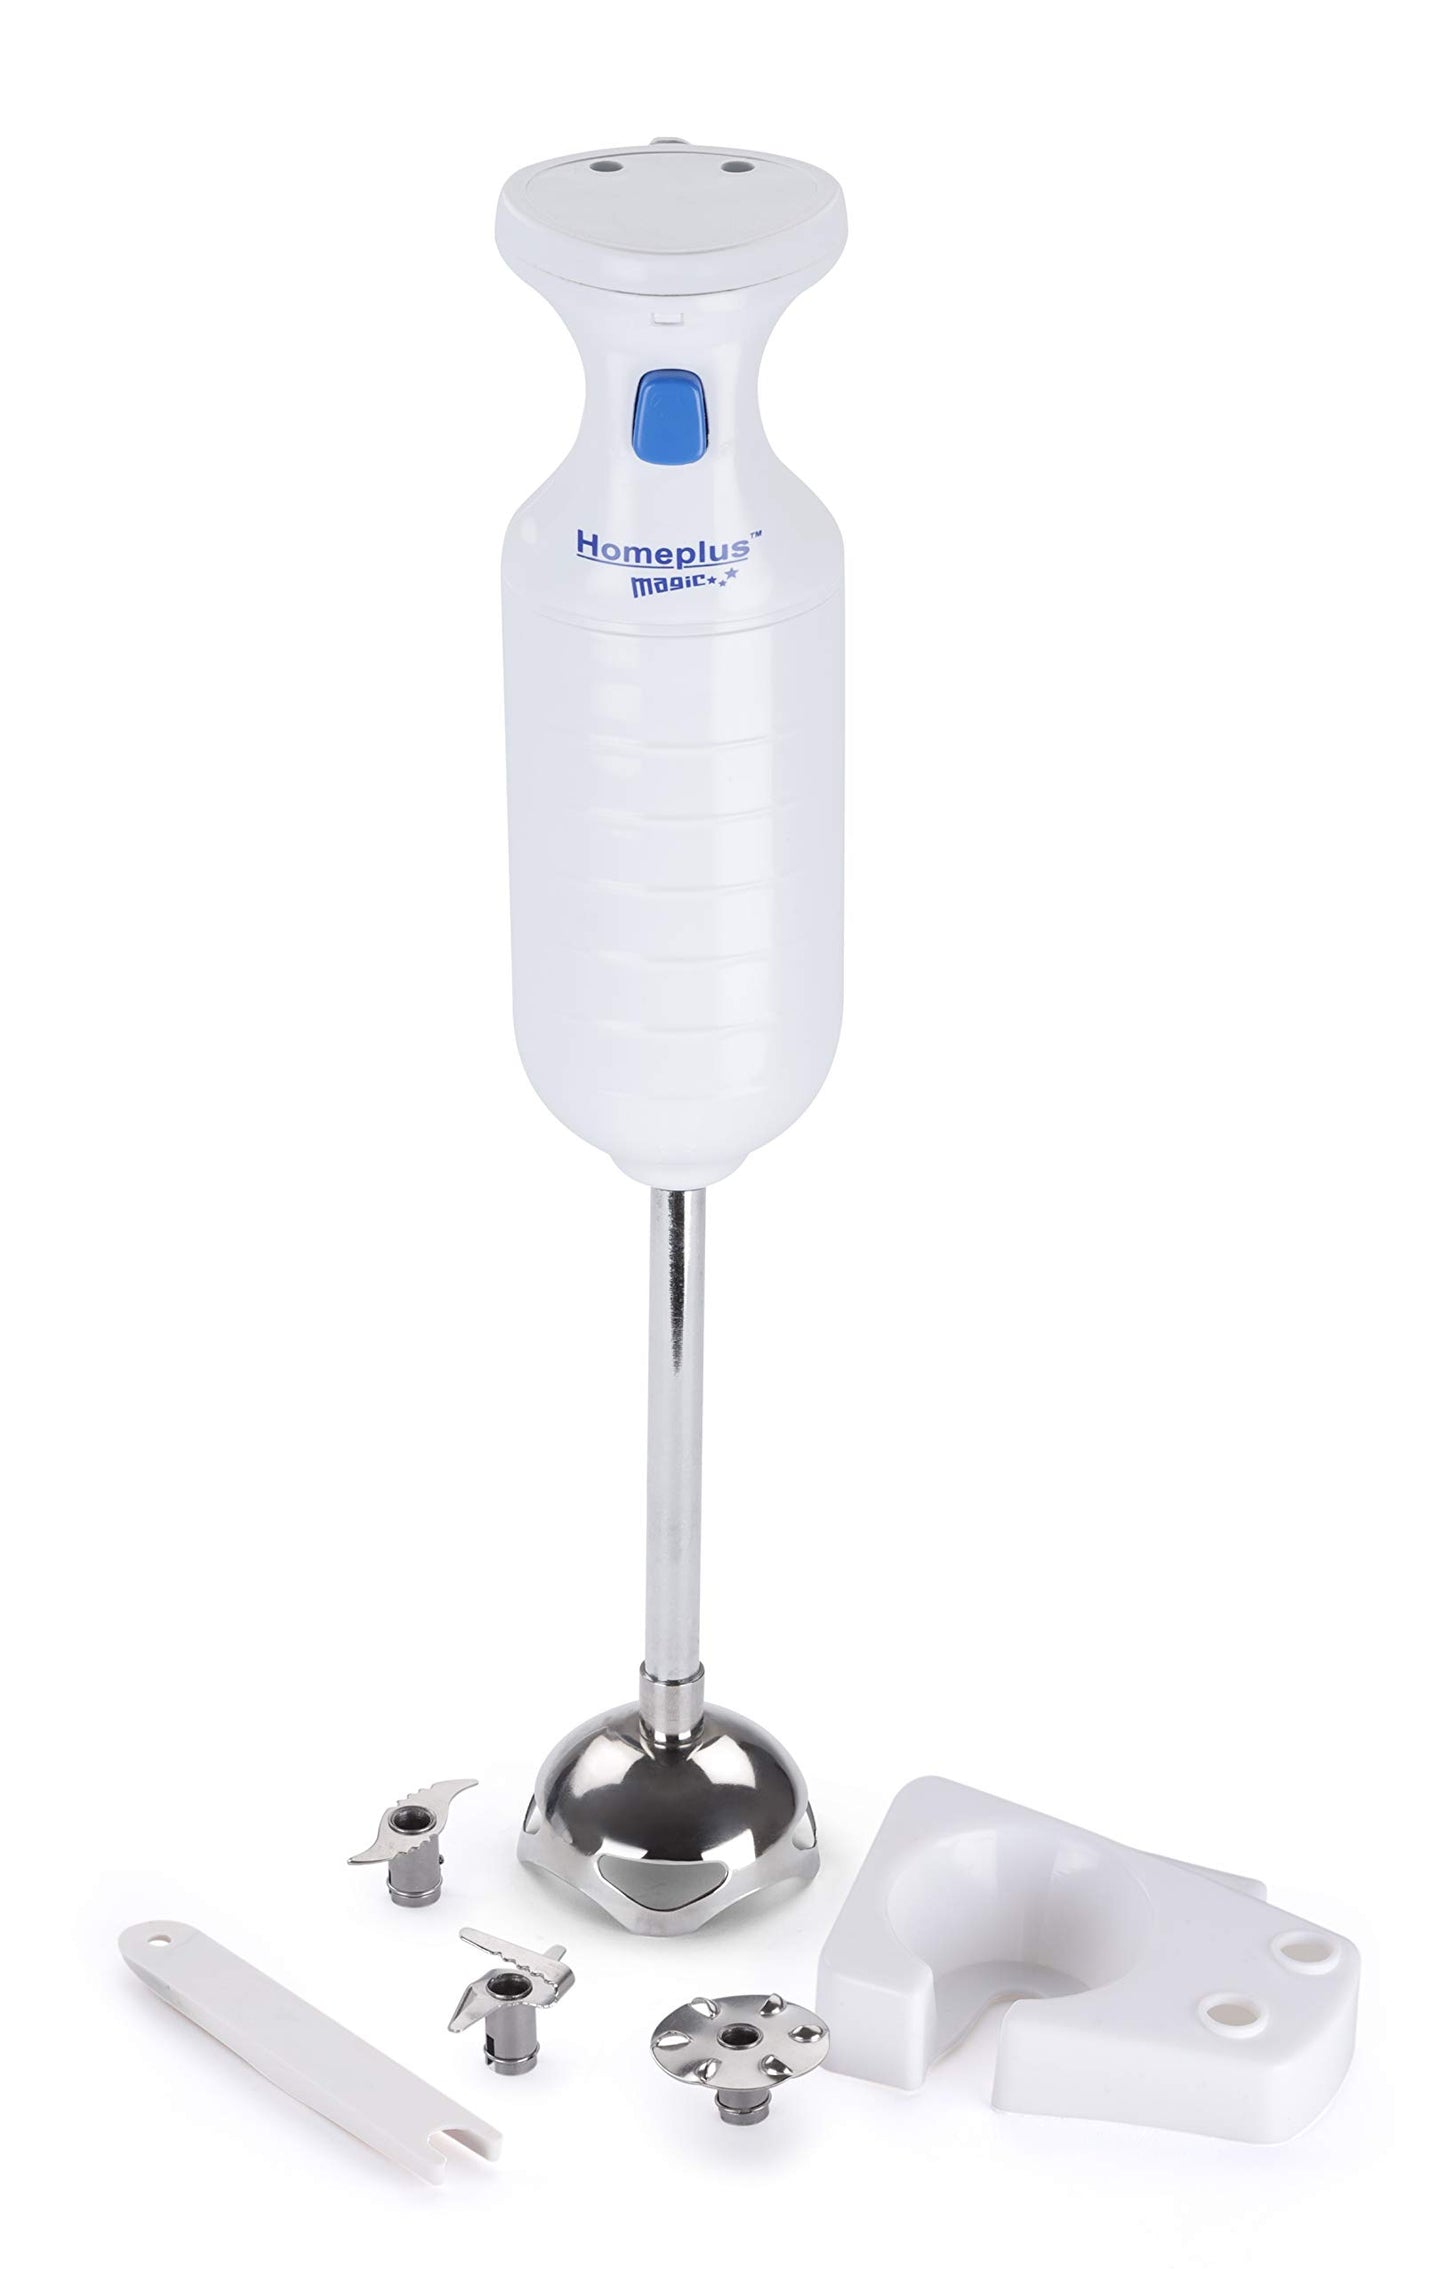 Home plus Turbo 300W Hand Blender (White) With Super Silent Multi-purpose Stainless Steel Blades